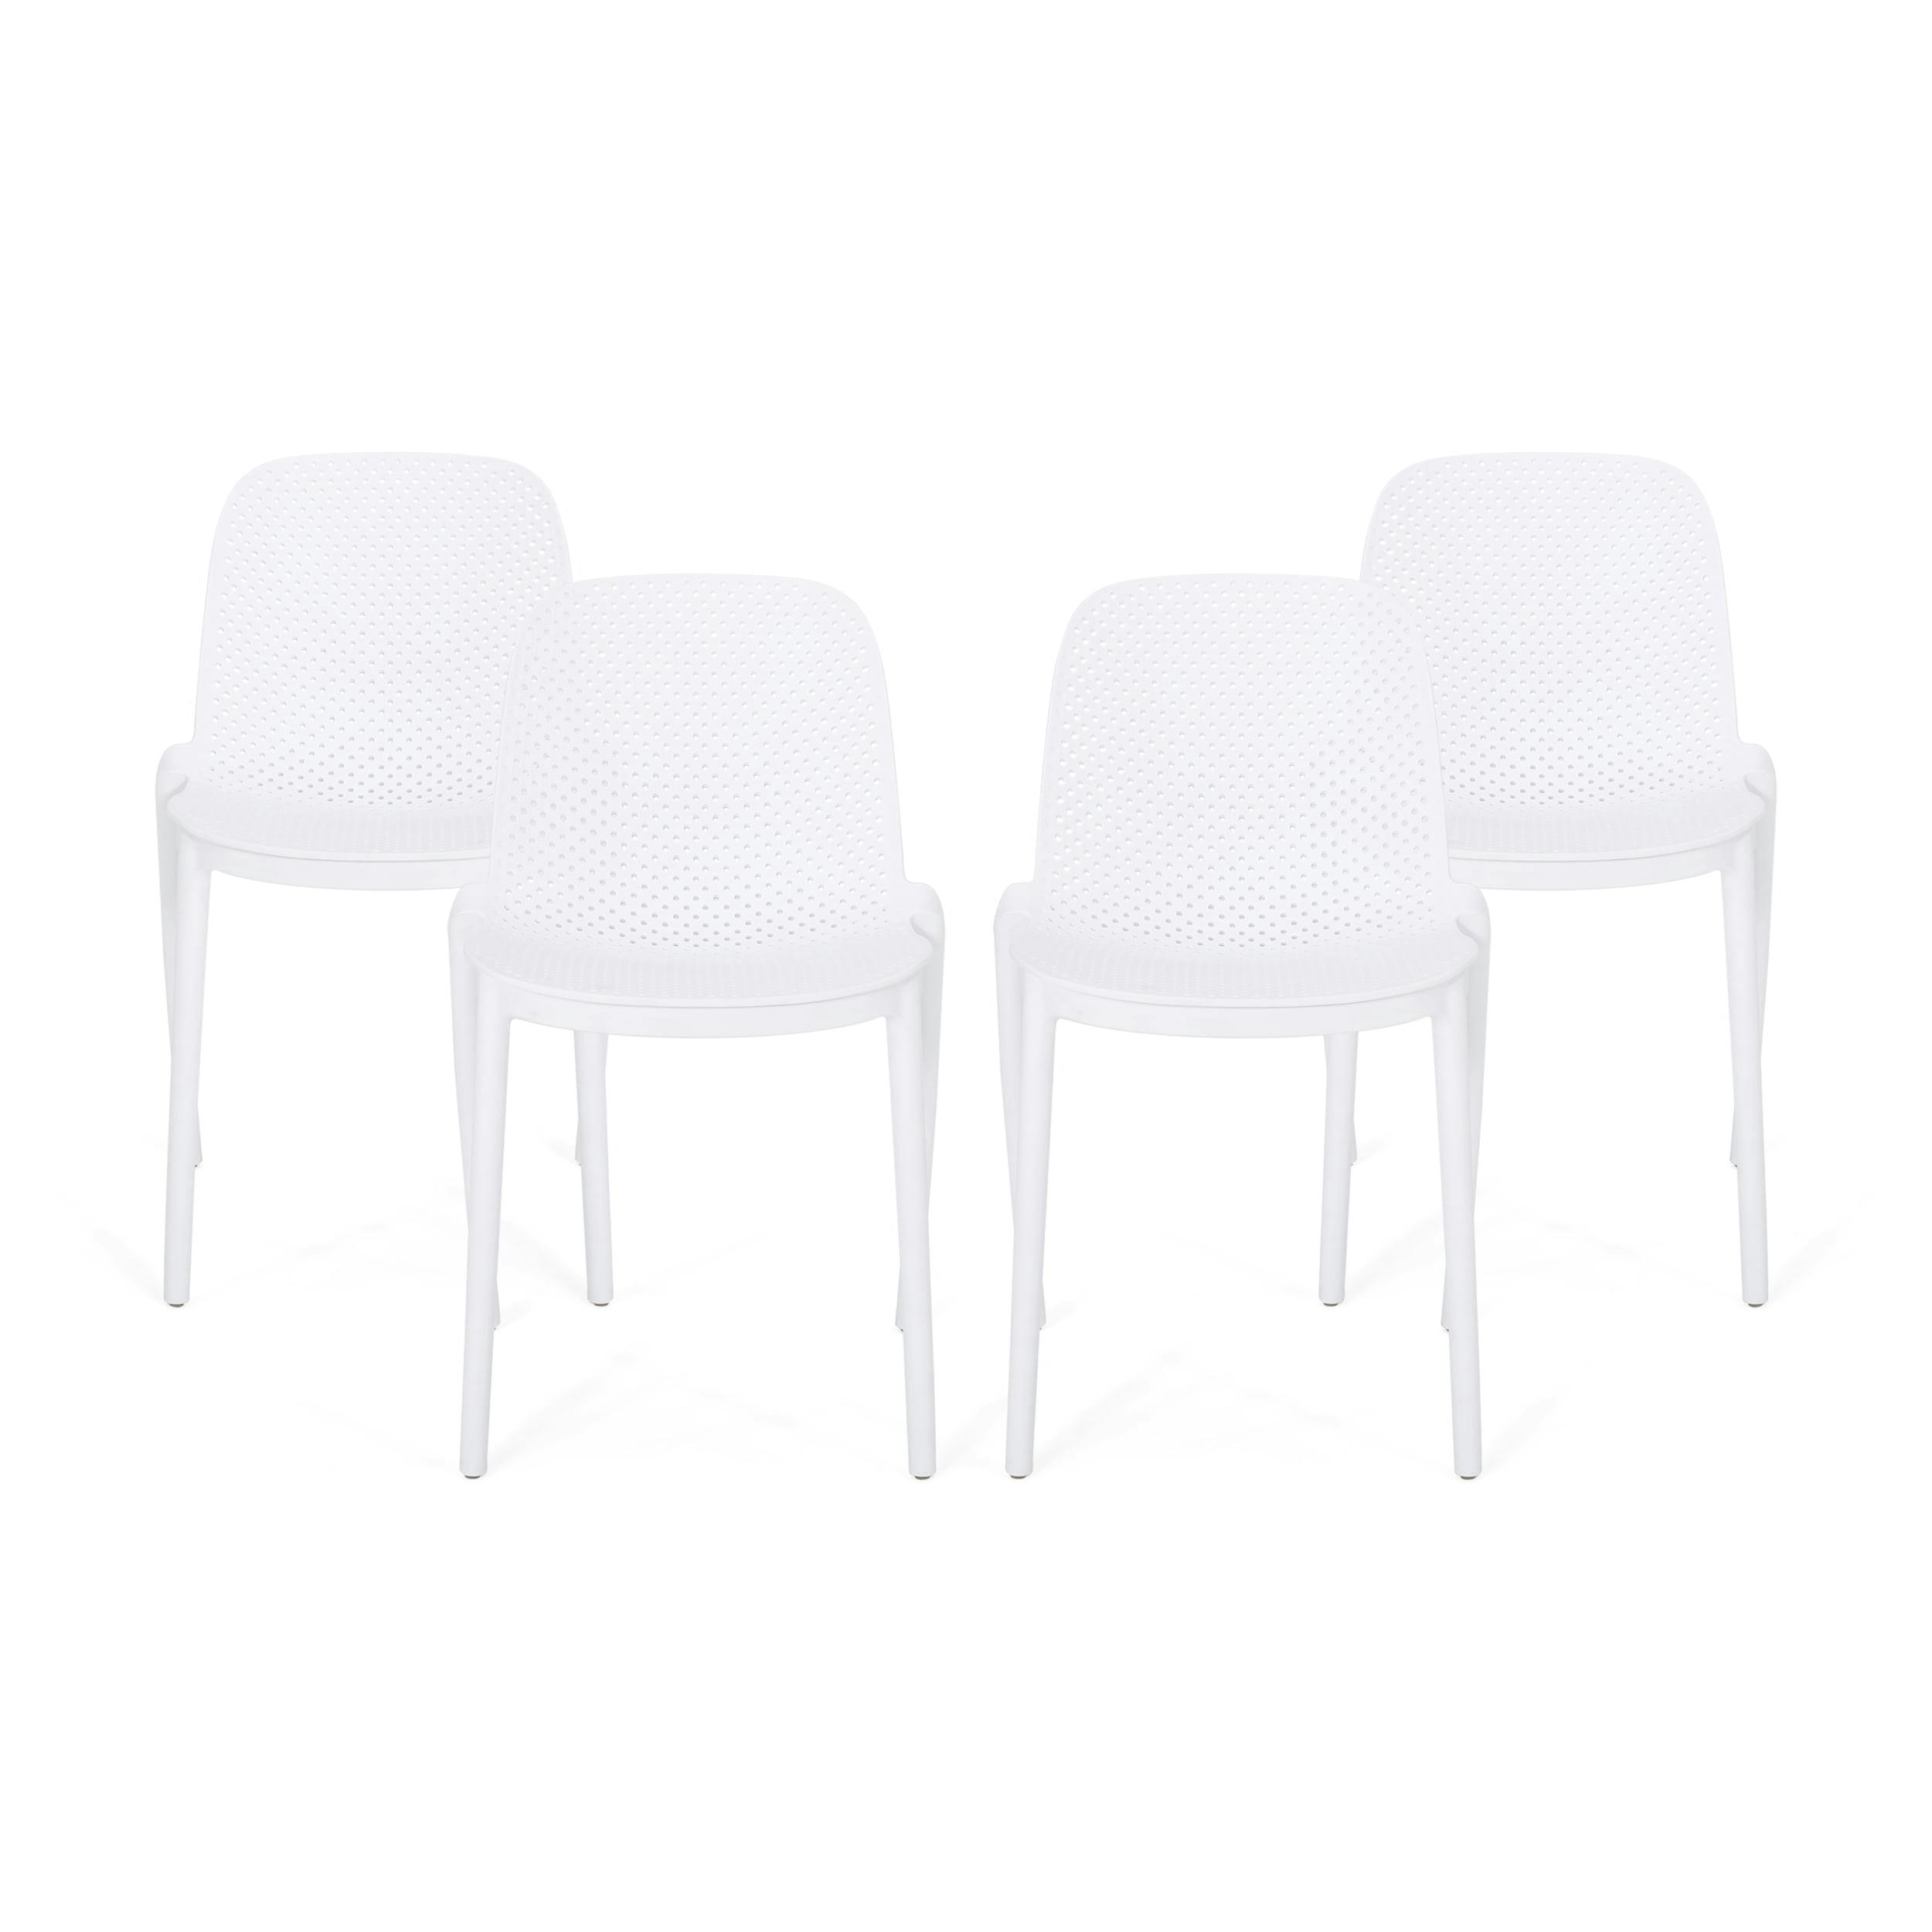 Modern Perforated White Polypropylene Outdoor Dining Chair Set of 4